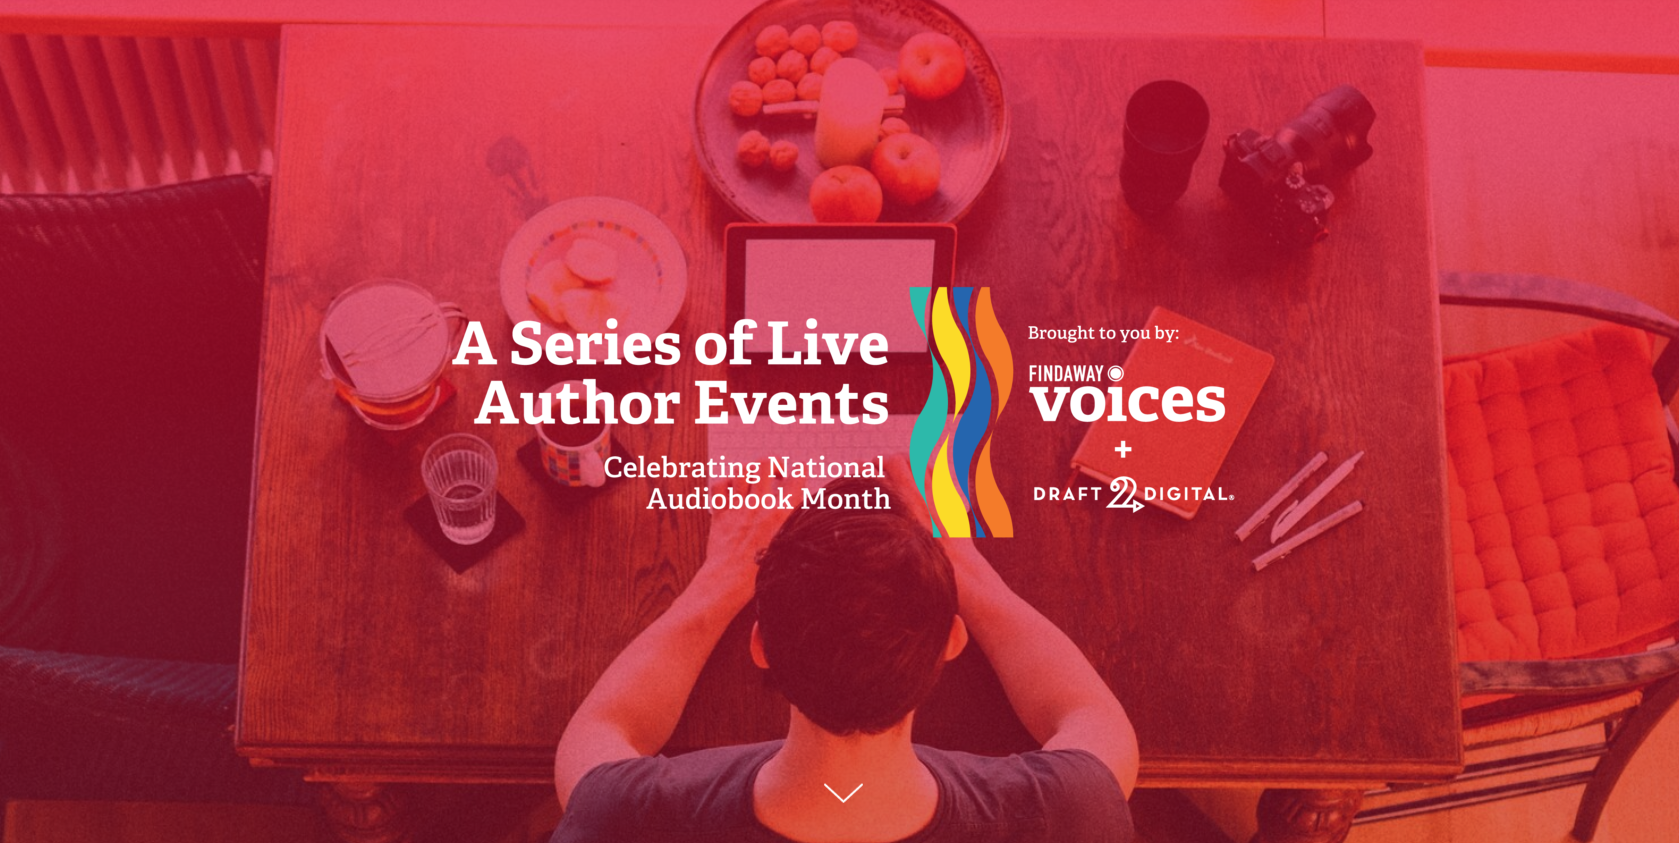 A Series of Live Author Events